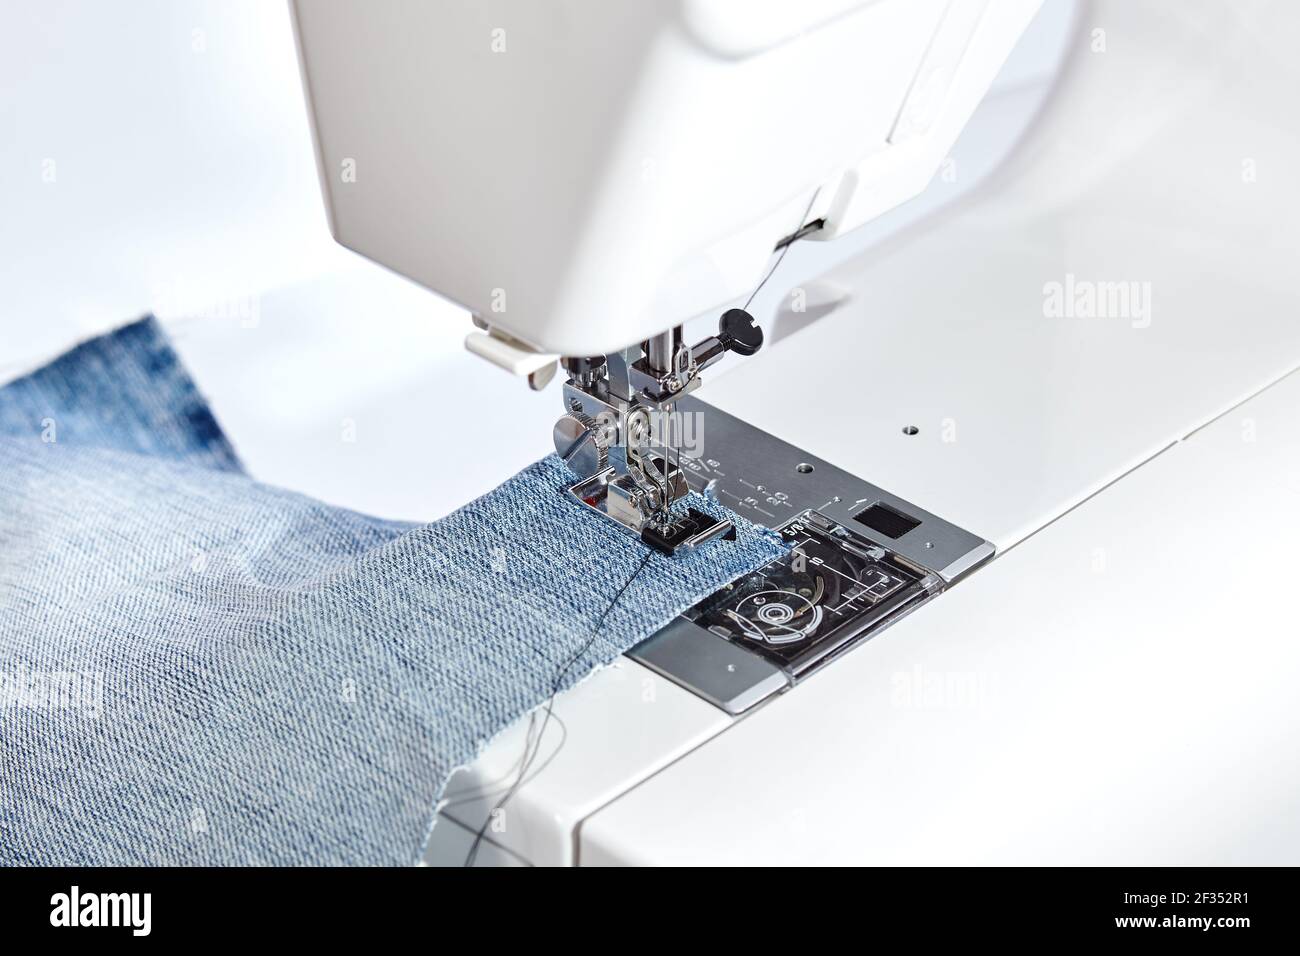 Sewing machine working part with blue denim cloth. A close-up shows a needle passing through tissue. Sewing machine with fabric and thread. Stock Photo